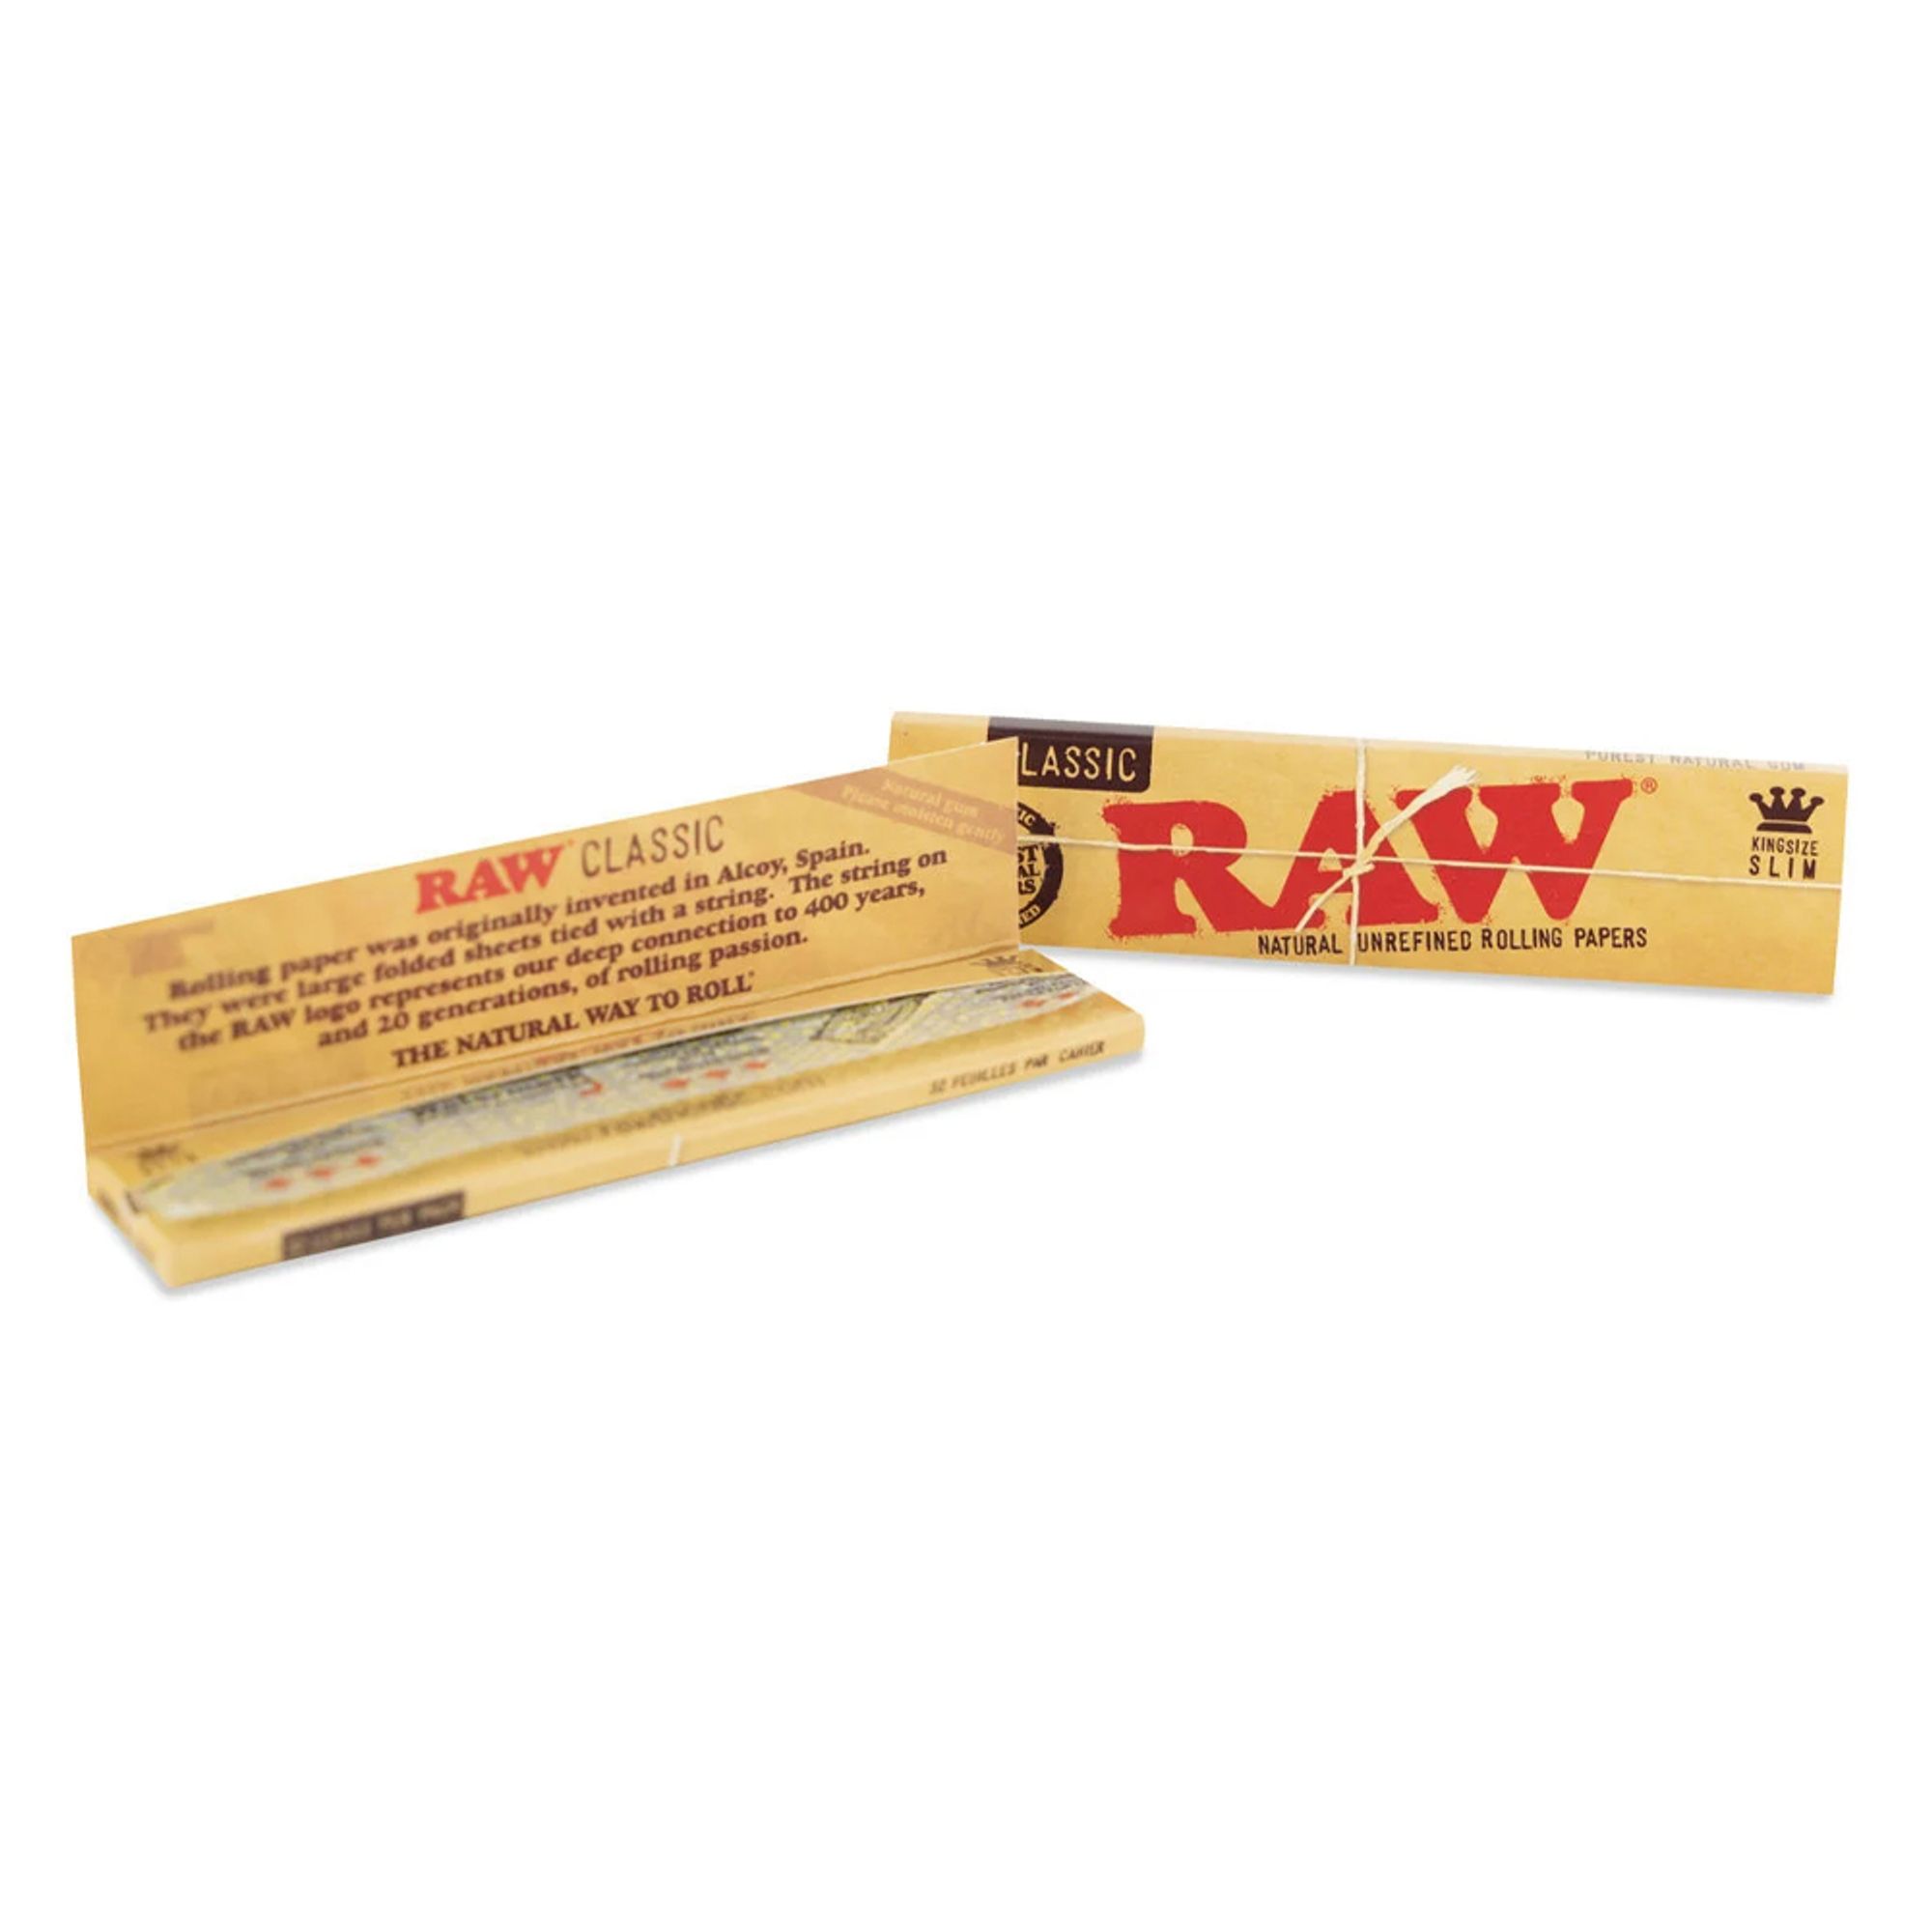 King Size Slim Ultra Thin Rolling Papers